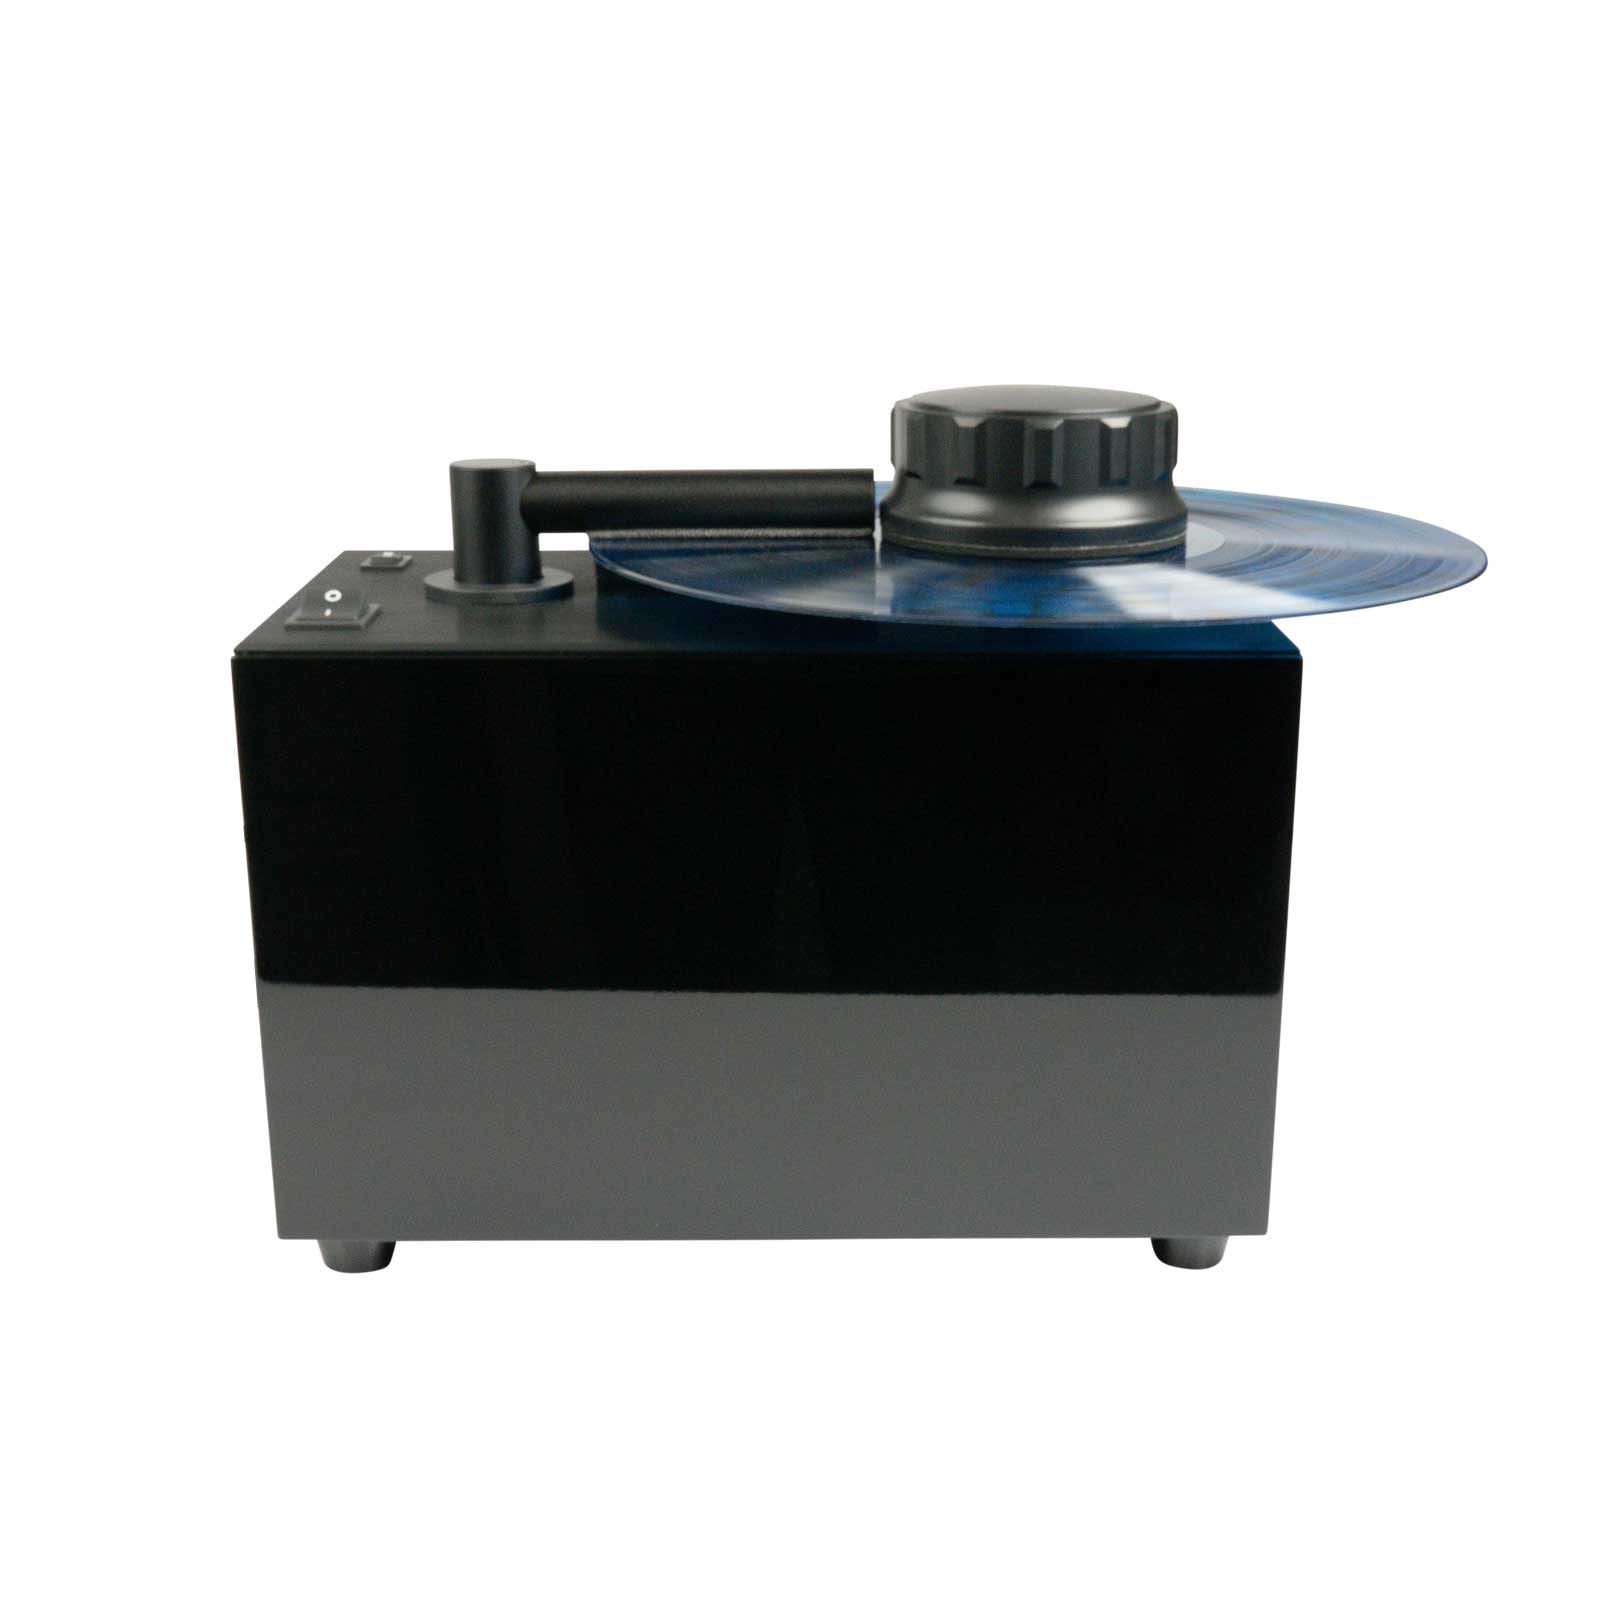 Record Doctor X Record Cleaning Machine (available to demo)